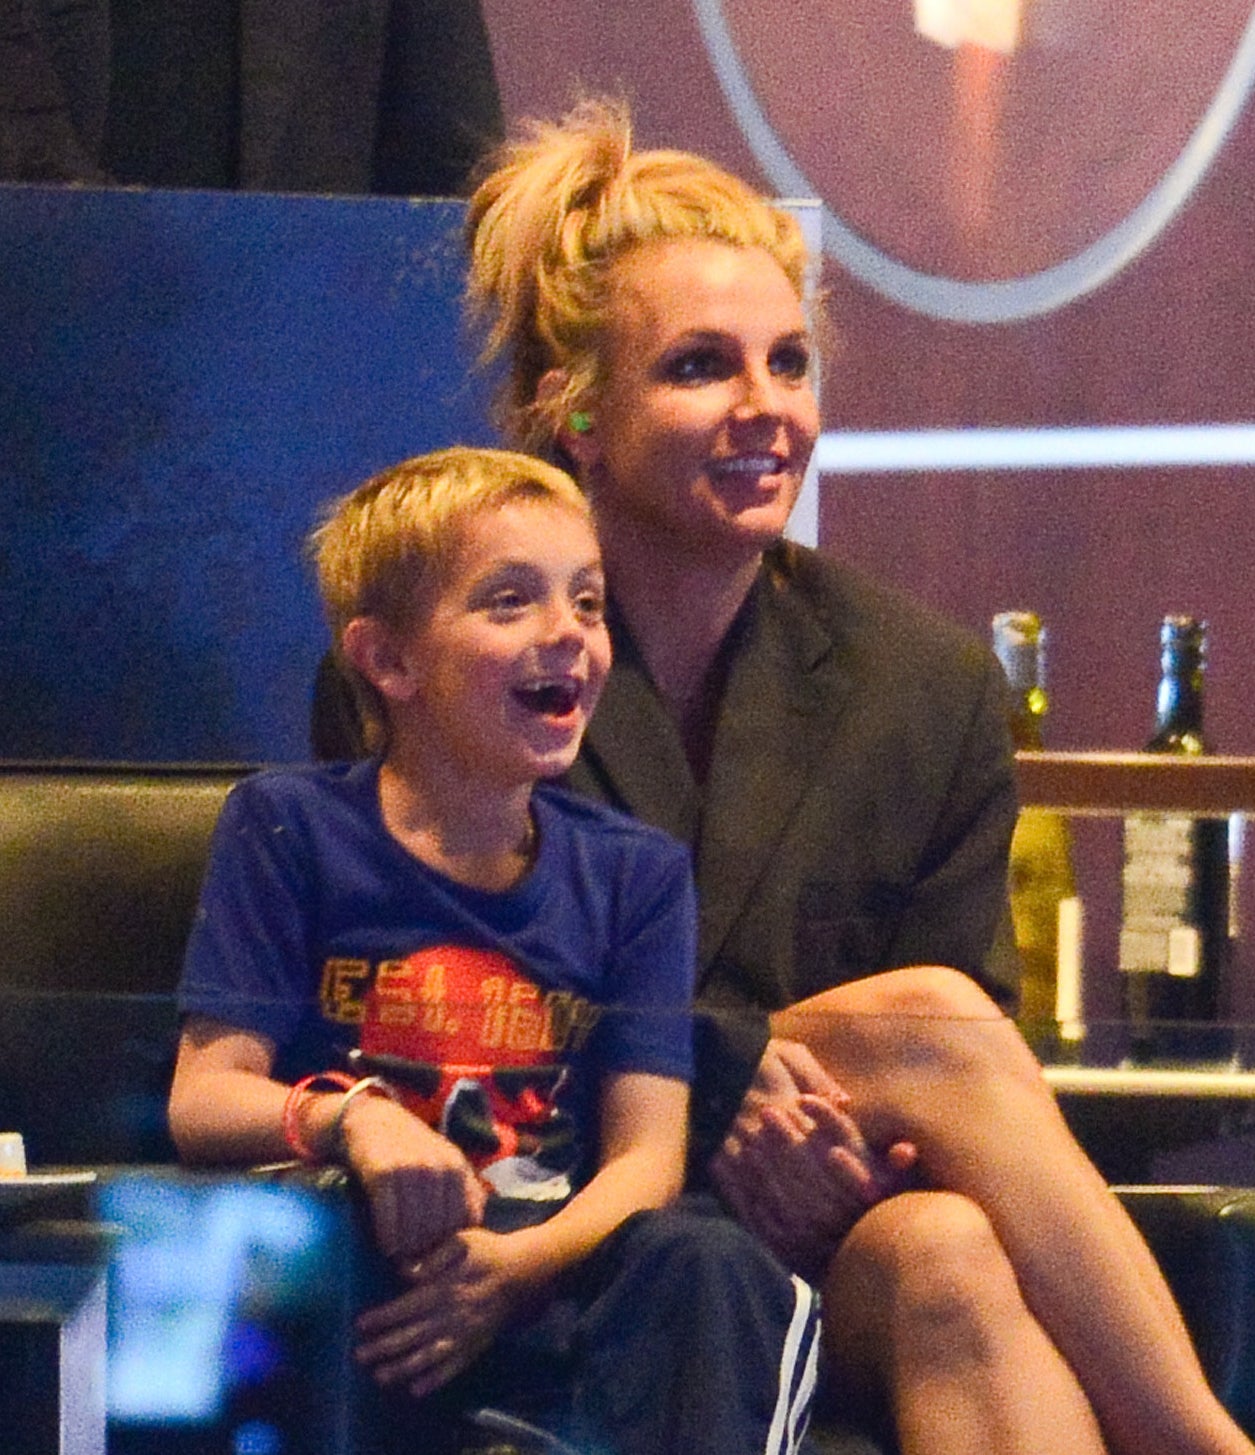 Britney and one of her young sons. smiling as they sit next to each other at an event